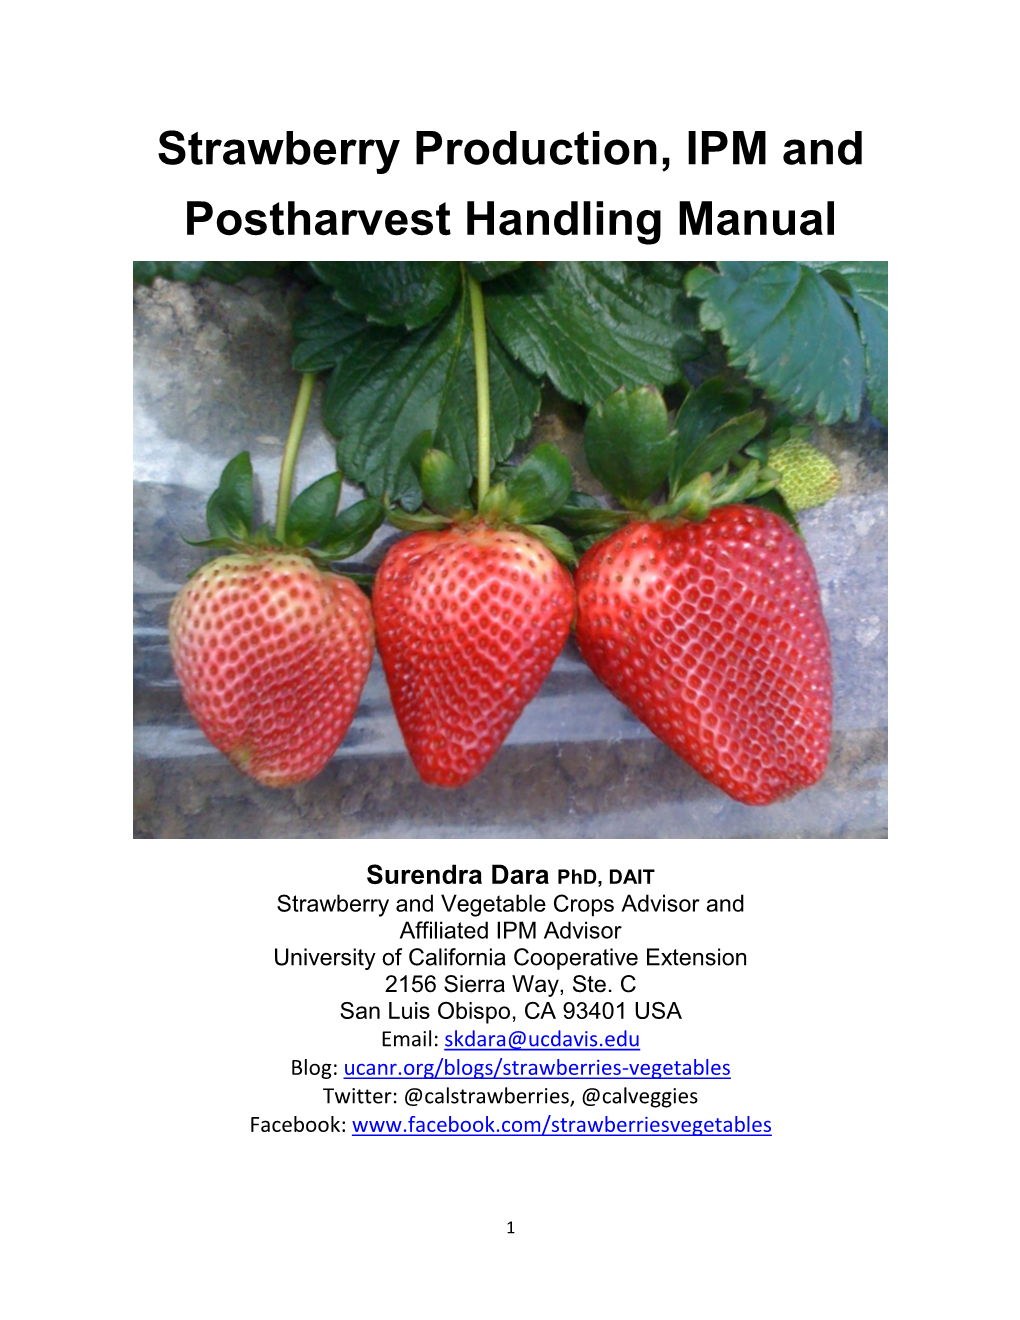 Strawberry Production, IPM and Postharvest Handling Manual